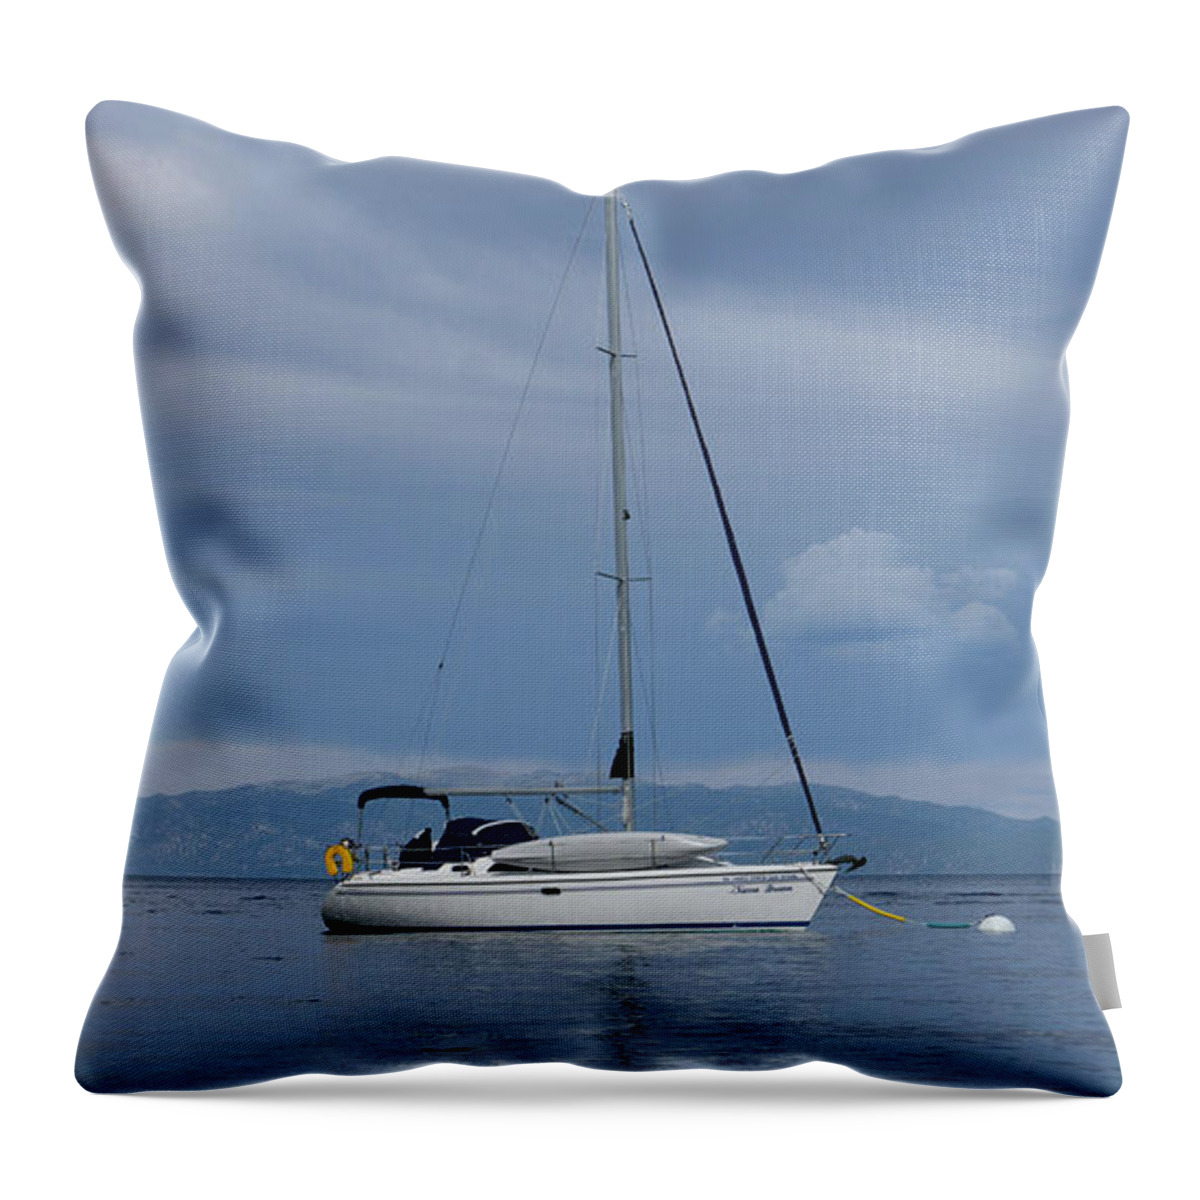 Lake Tahoe Throw Pillow featuring the photograph Sailboat Lake Tahoe by Anthony Giammarino